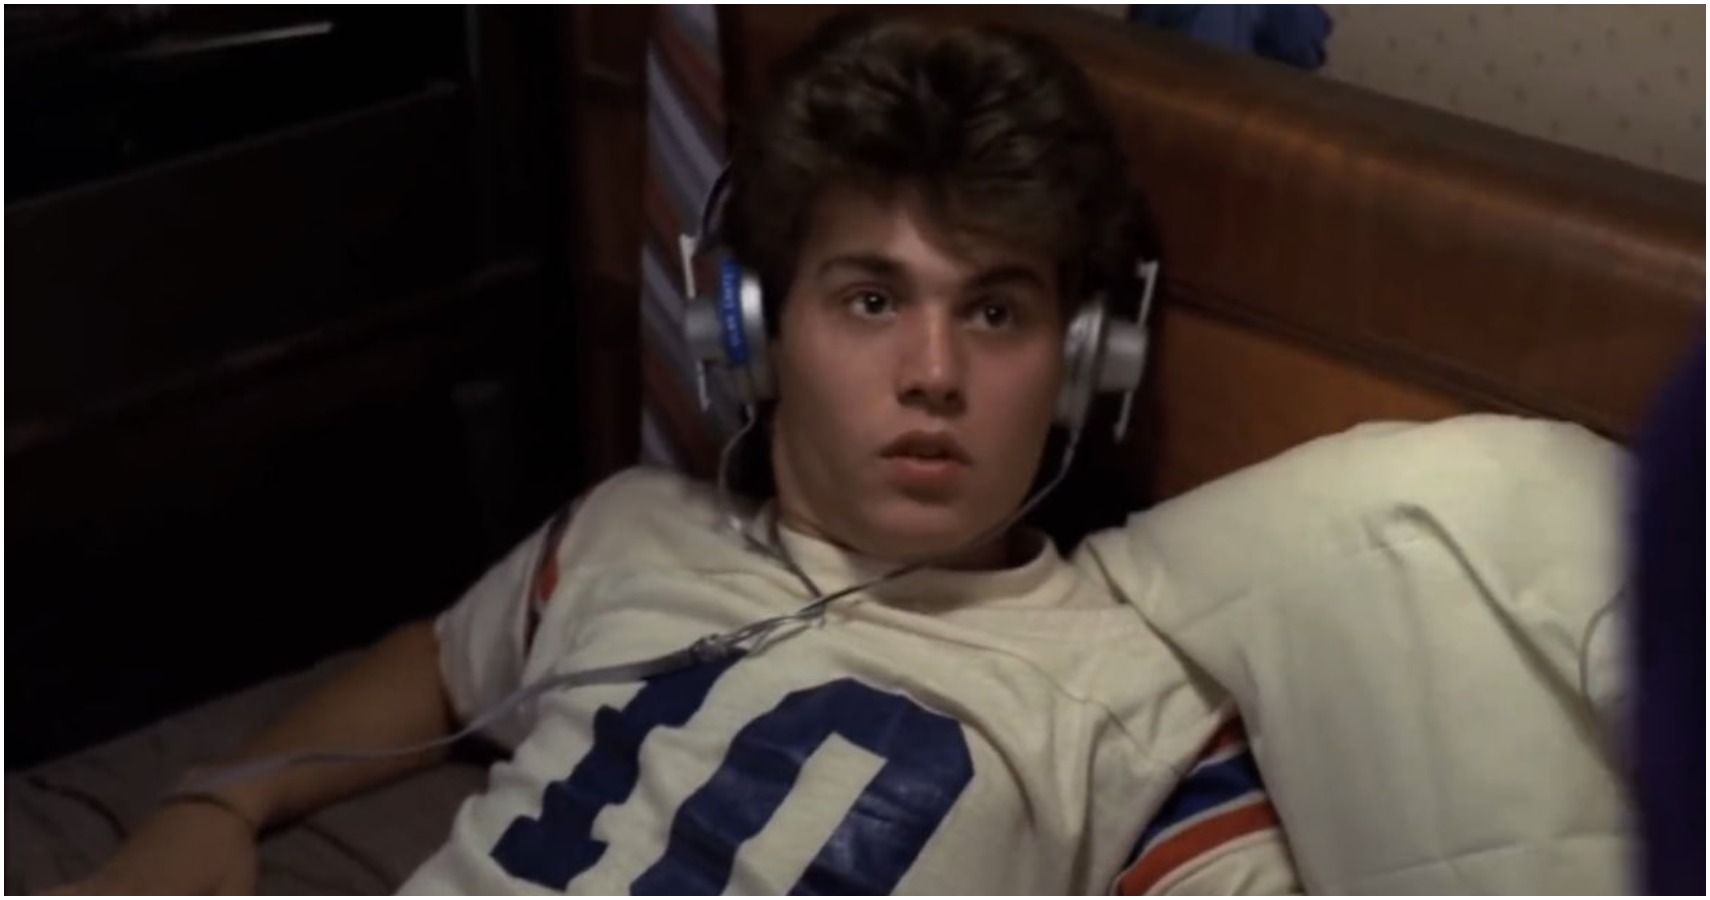 Johnny Depp terrified in bed with headphones on